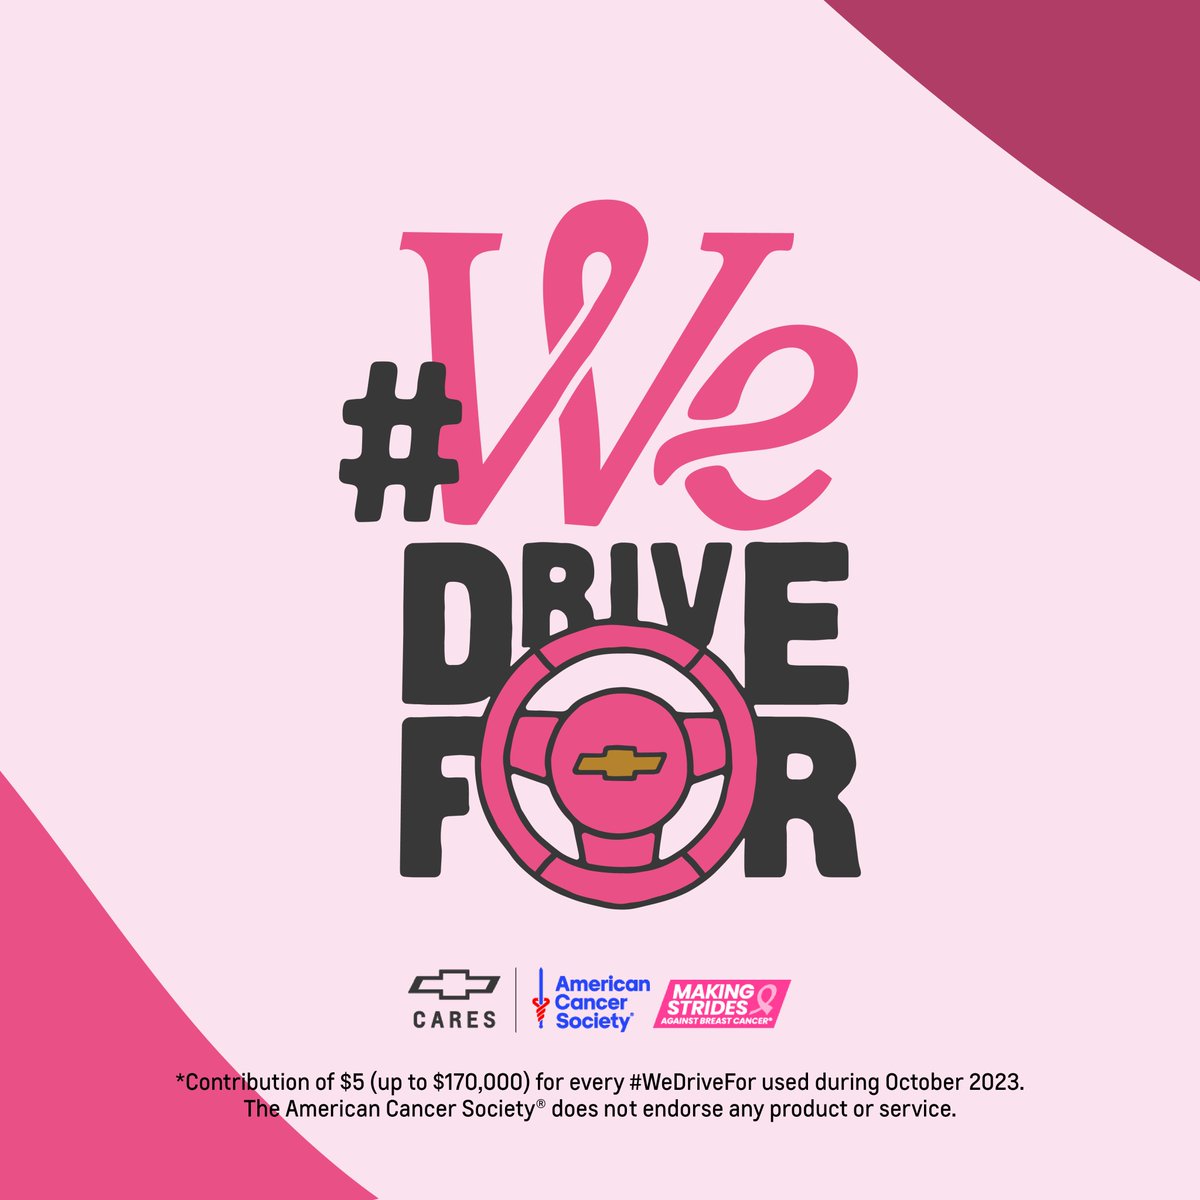 There's still time! Post or repost with #WeDriveFor and #Chevy will contribute $5 (up to $170,000) to @AmericanCancer.